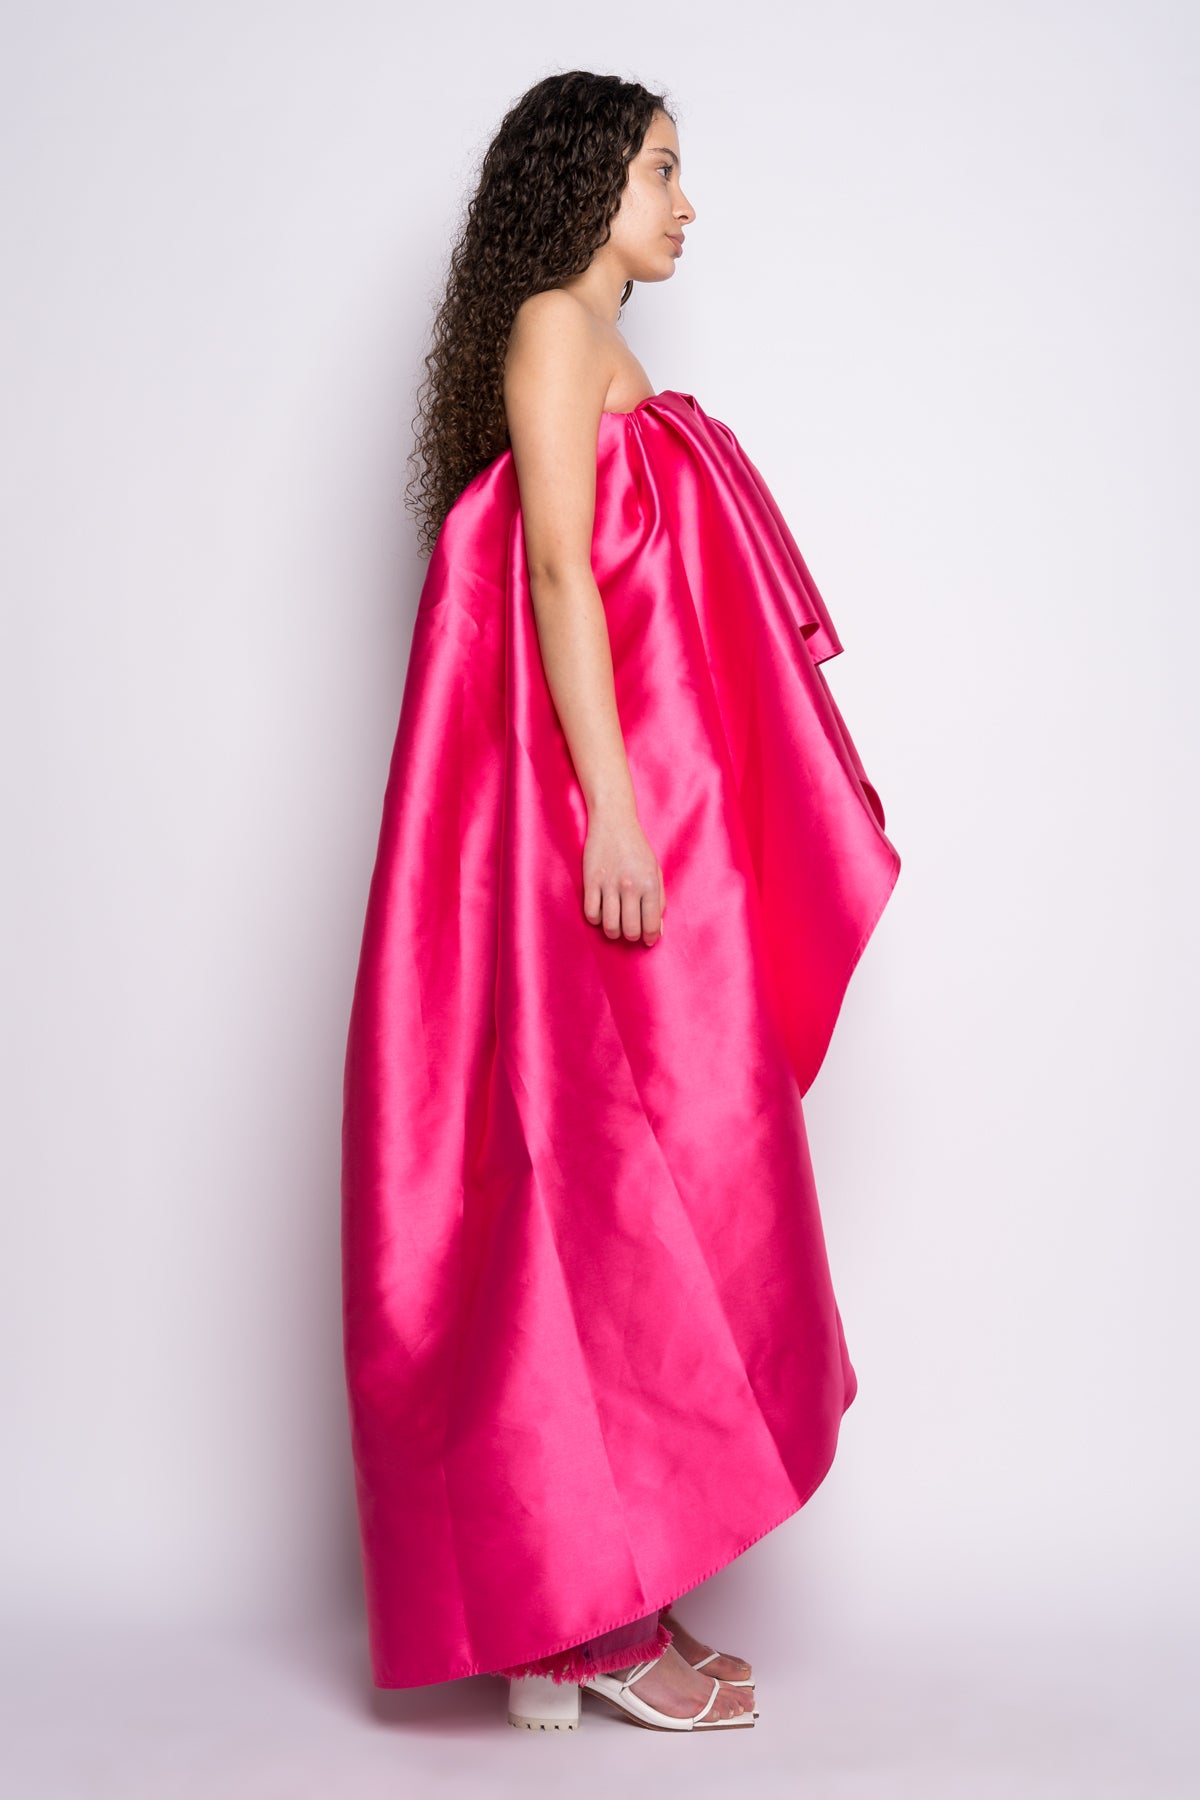 PINK PLEATED STRAPLESS TOP WITH LONG BACK marques almeida